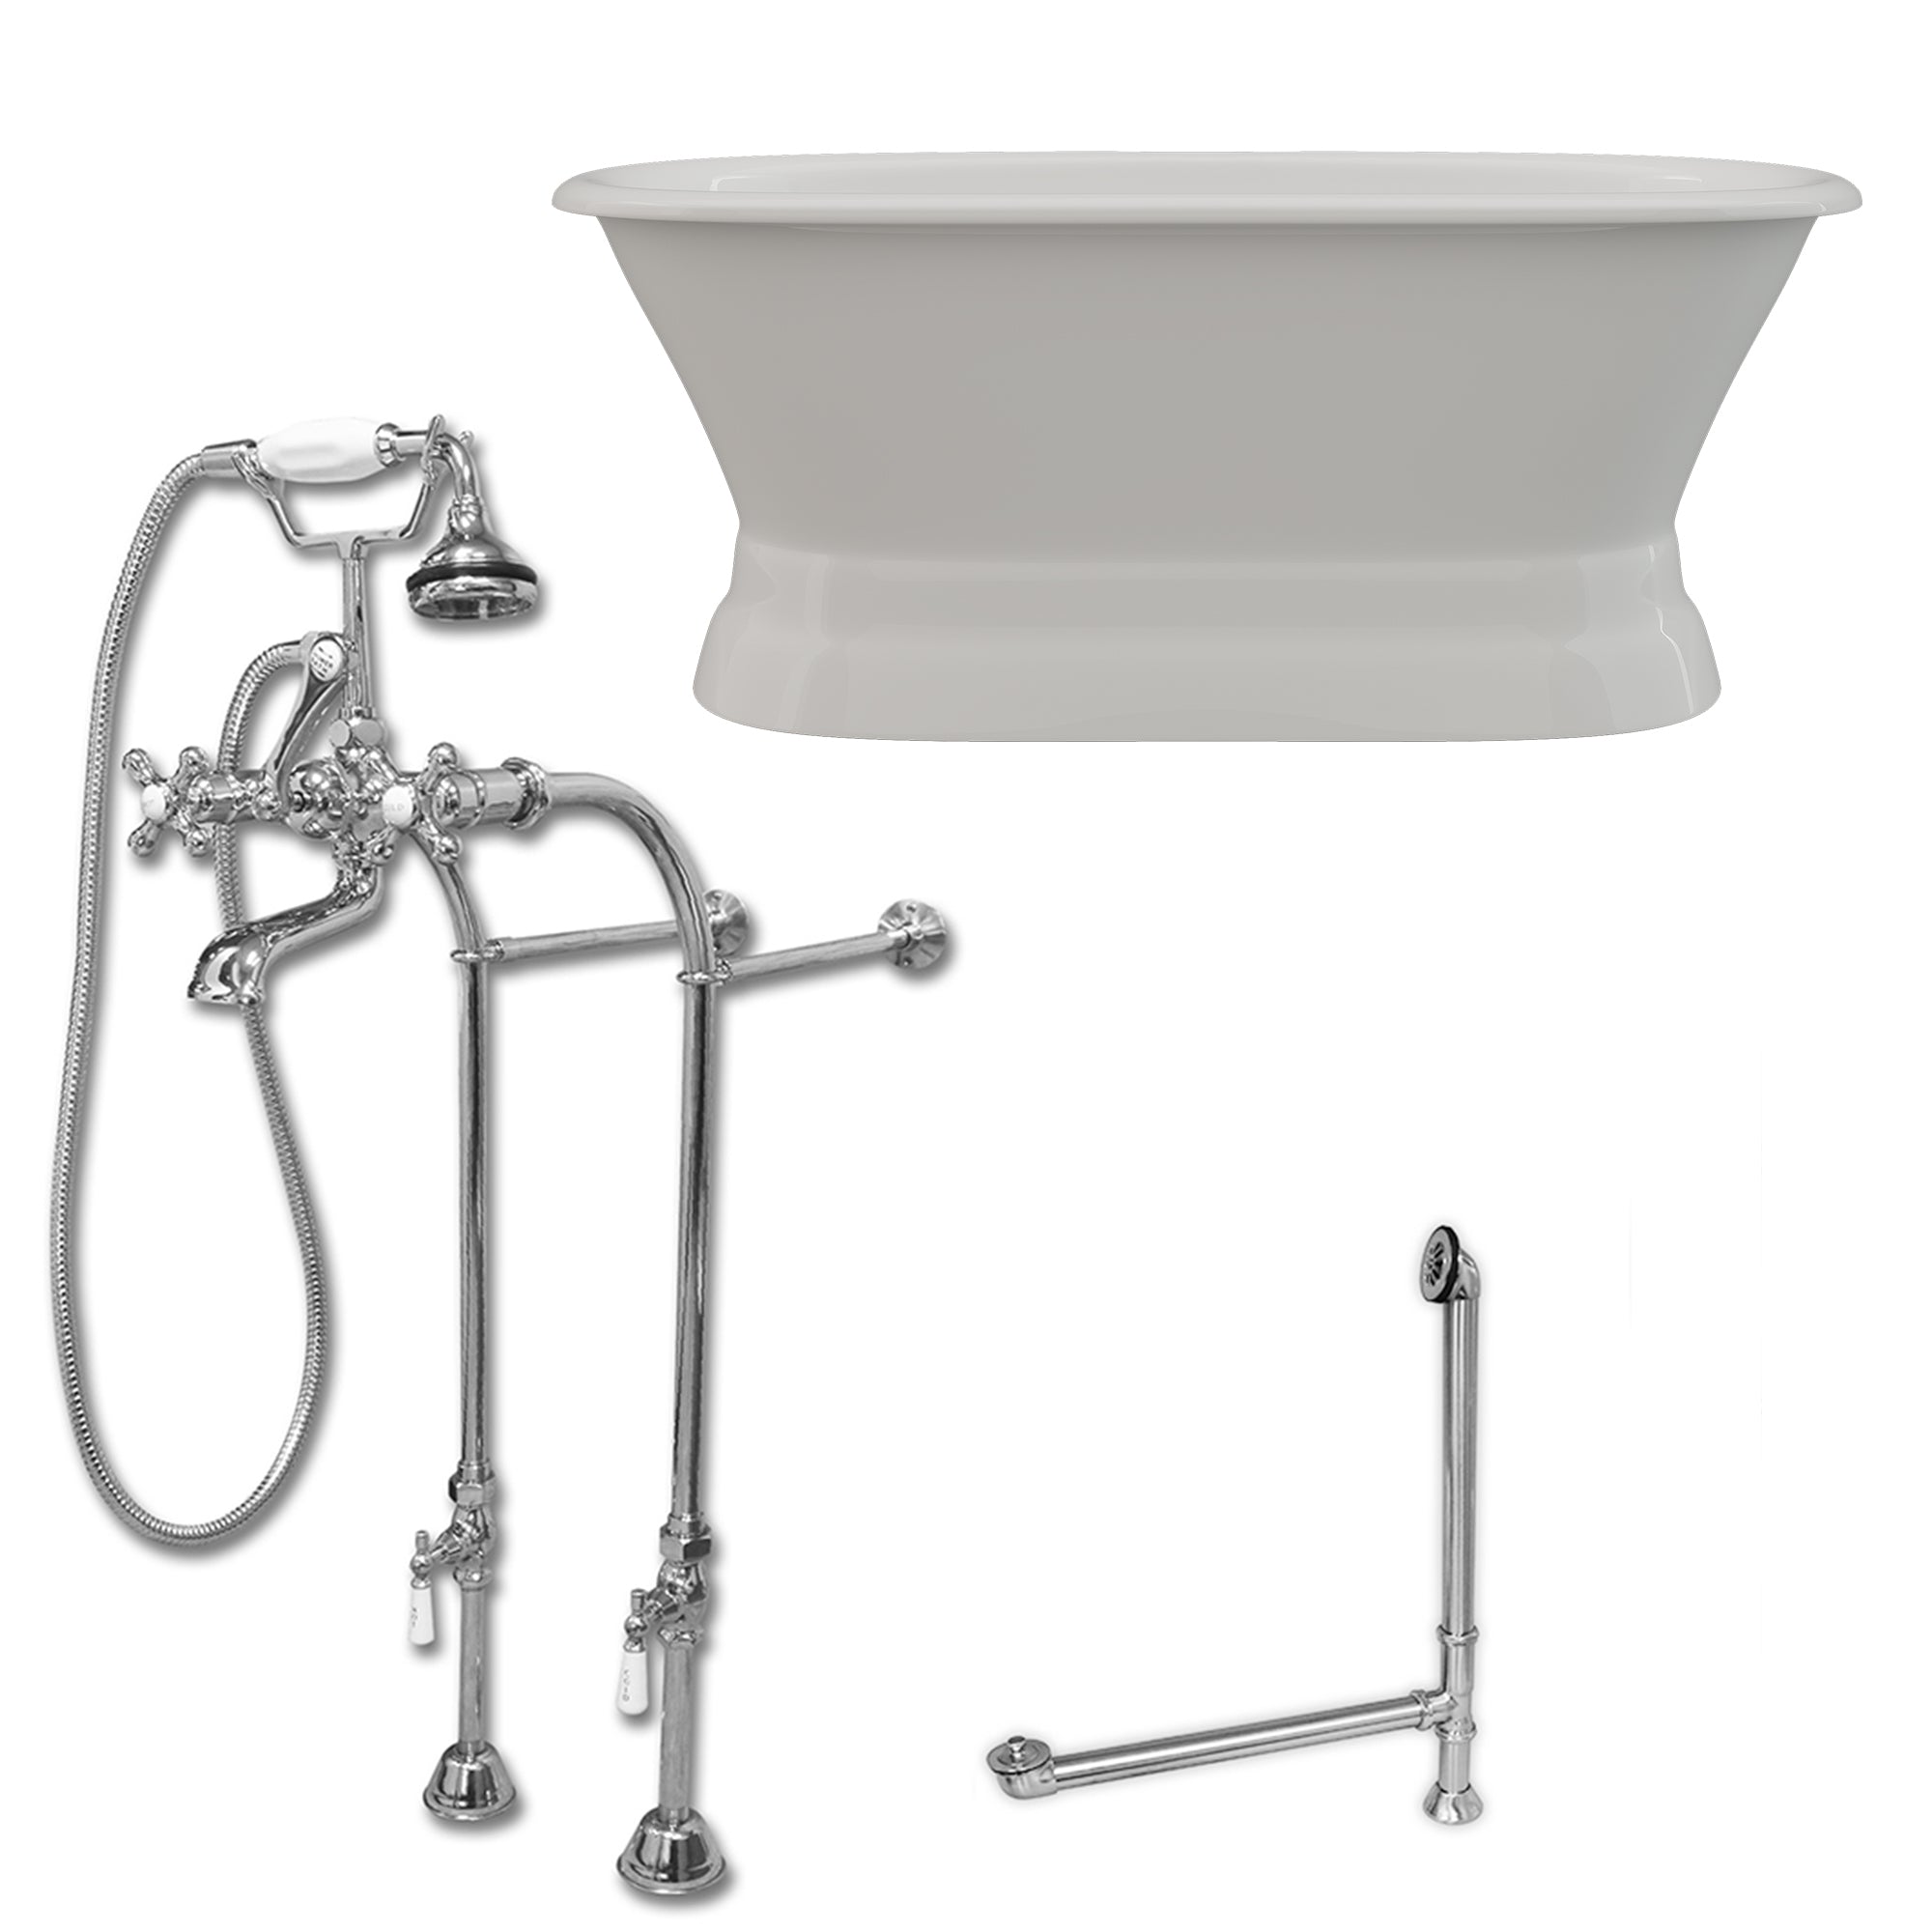 Cambridge Plumbing 60-Inch Double Ended Cast Iron Pedestal Soaking Tub (Porcelain enamel interior and white paint exterior)  and Complete Plumbing Package (Brushed nickel) DE60-PED-398463-PKG-NH - Vital Hydrotherapy